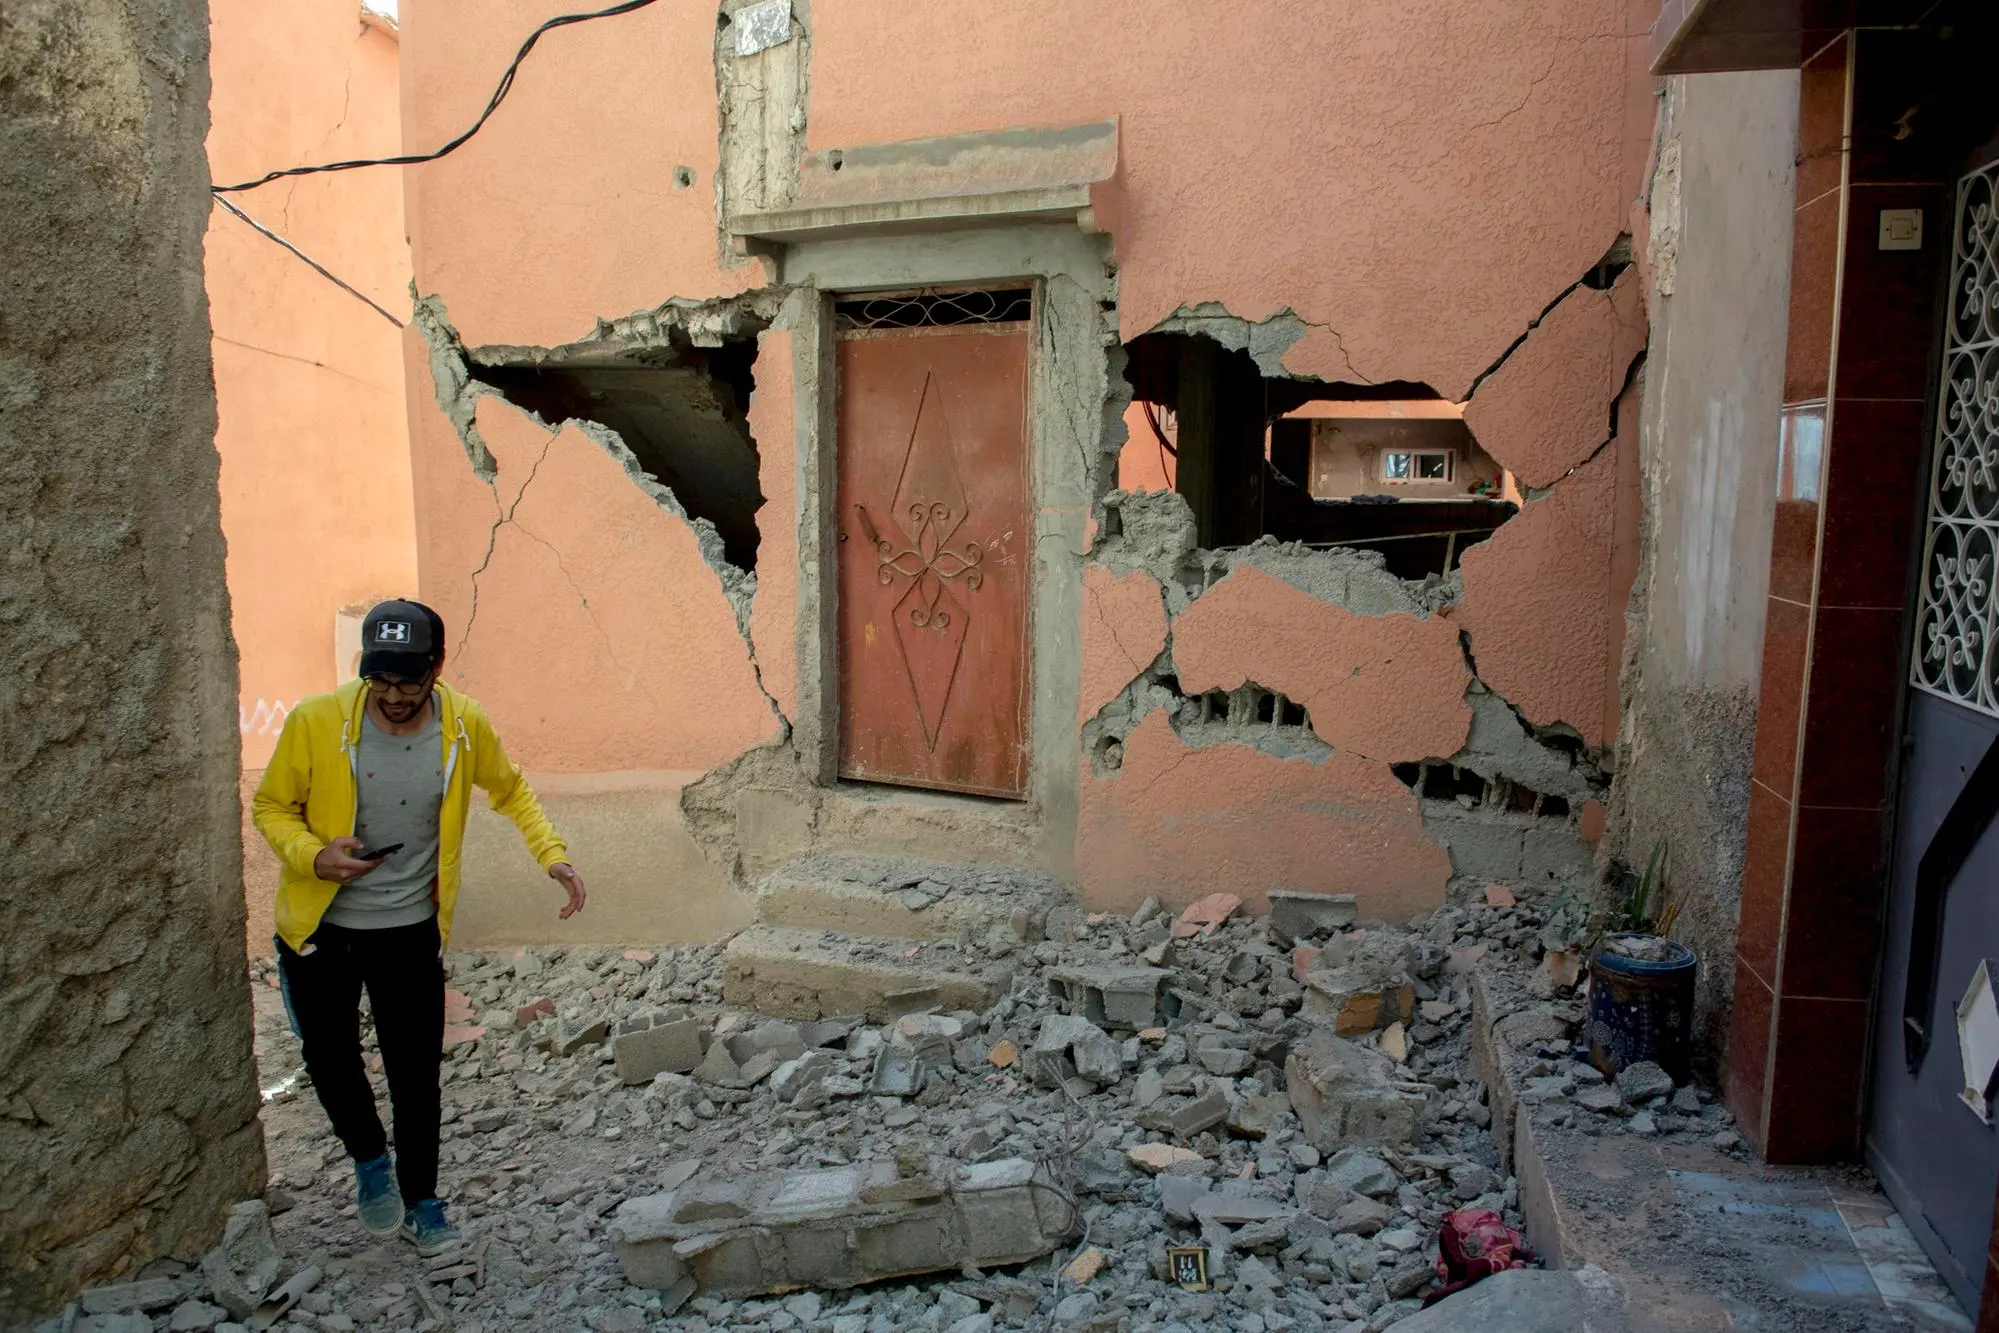 epa10850165 A person walks over debris next to a damaged building following an earthquake in Marrakesh, Morocco, 09 September 2023. A powerful earthquake that hit central Morocco late 08 September, killed at least 820 people and injured 672 others, according to a provisional report from the country's Interior Ministry. The earthquake, measuring magnitude 6.8 according to the USGS, damaged buildings from villages and towns in the Atlas Mountains to Marrakesh. EPA/JALAL MORCHIDI